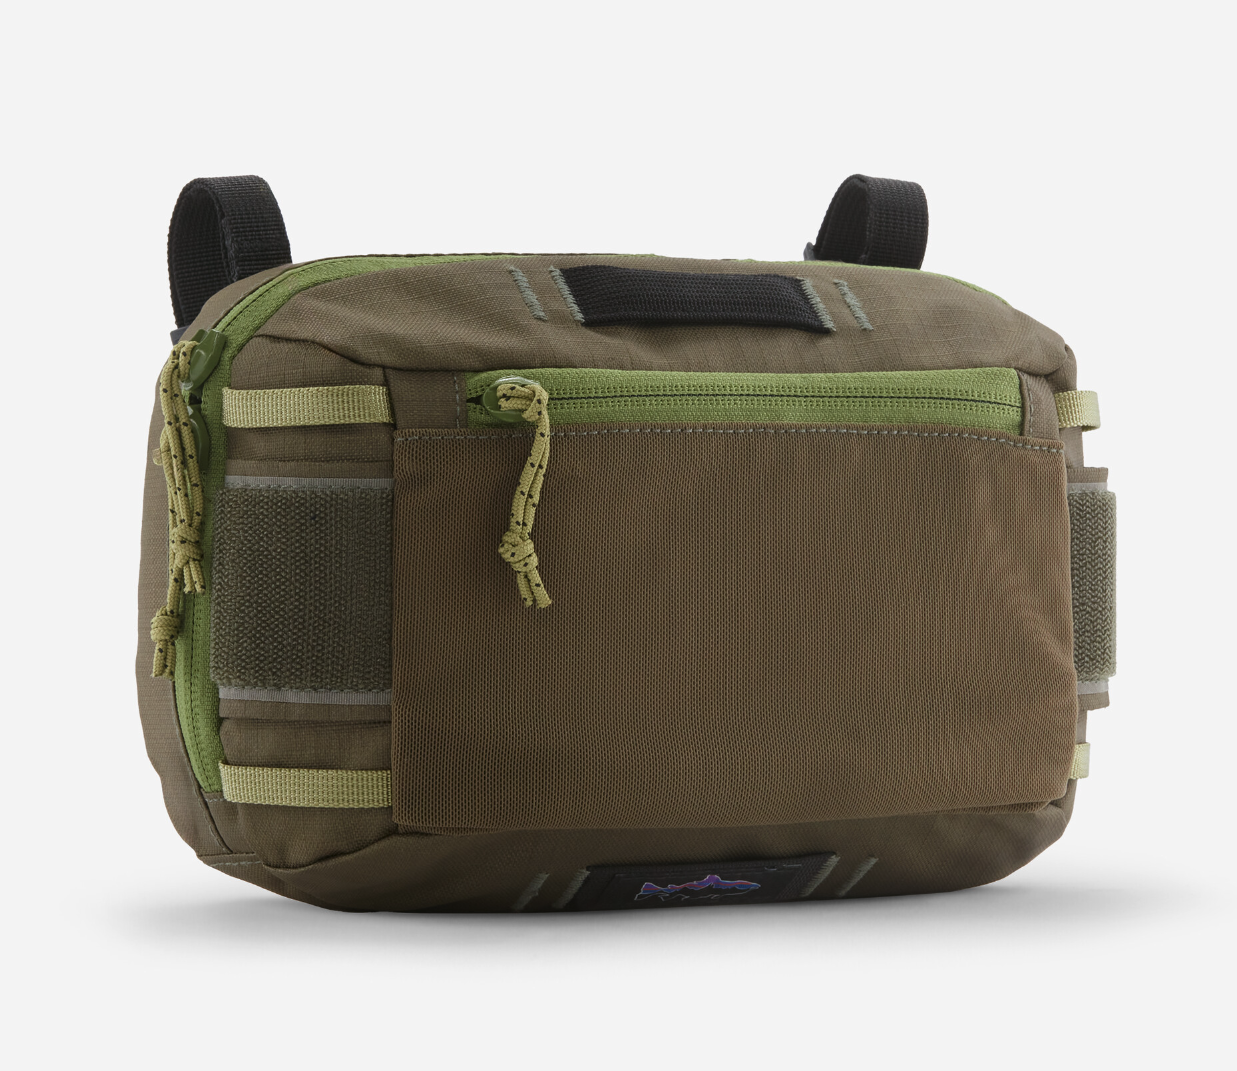 https://www.theflyfishers.com/Content/files/Patagonia/PacksBagsLuggage/WaderWorkStation81676/BSNG.png